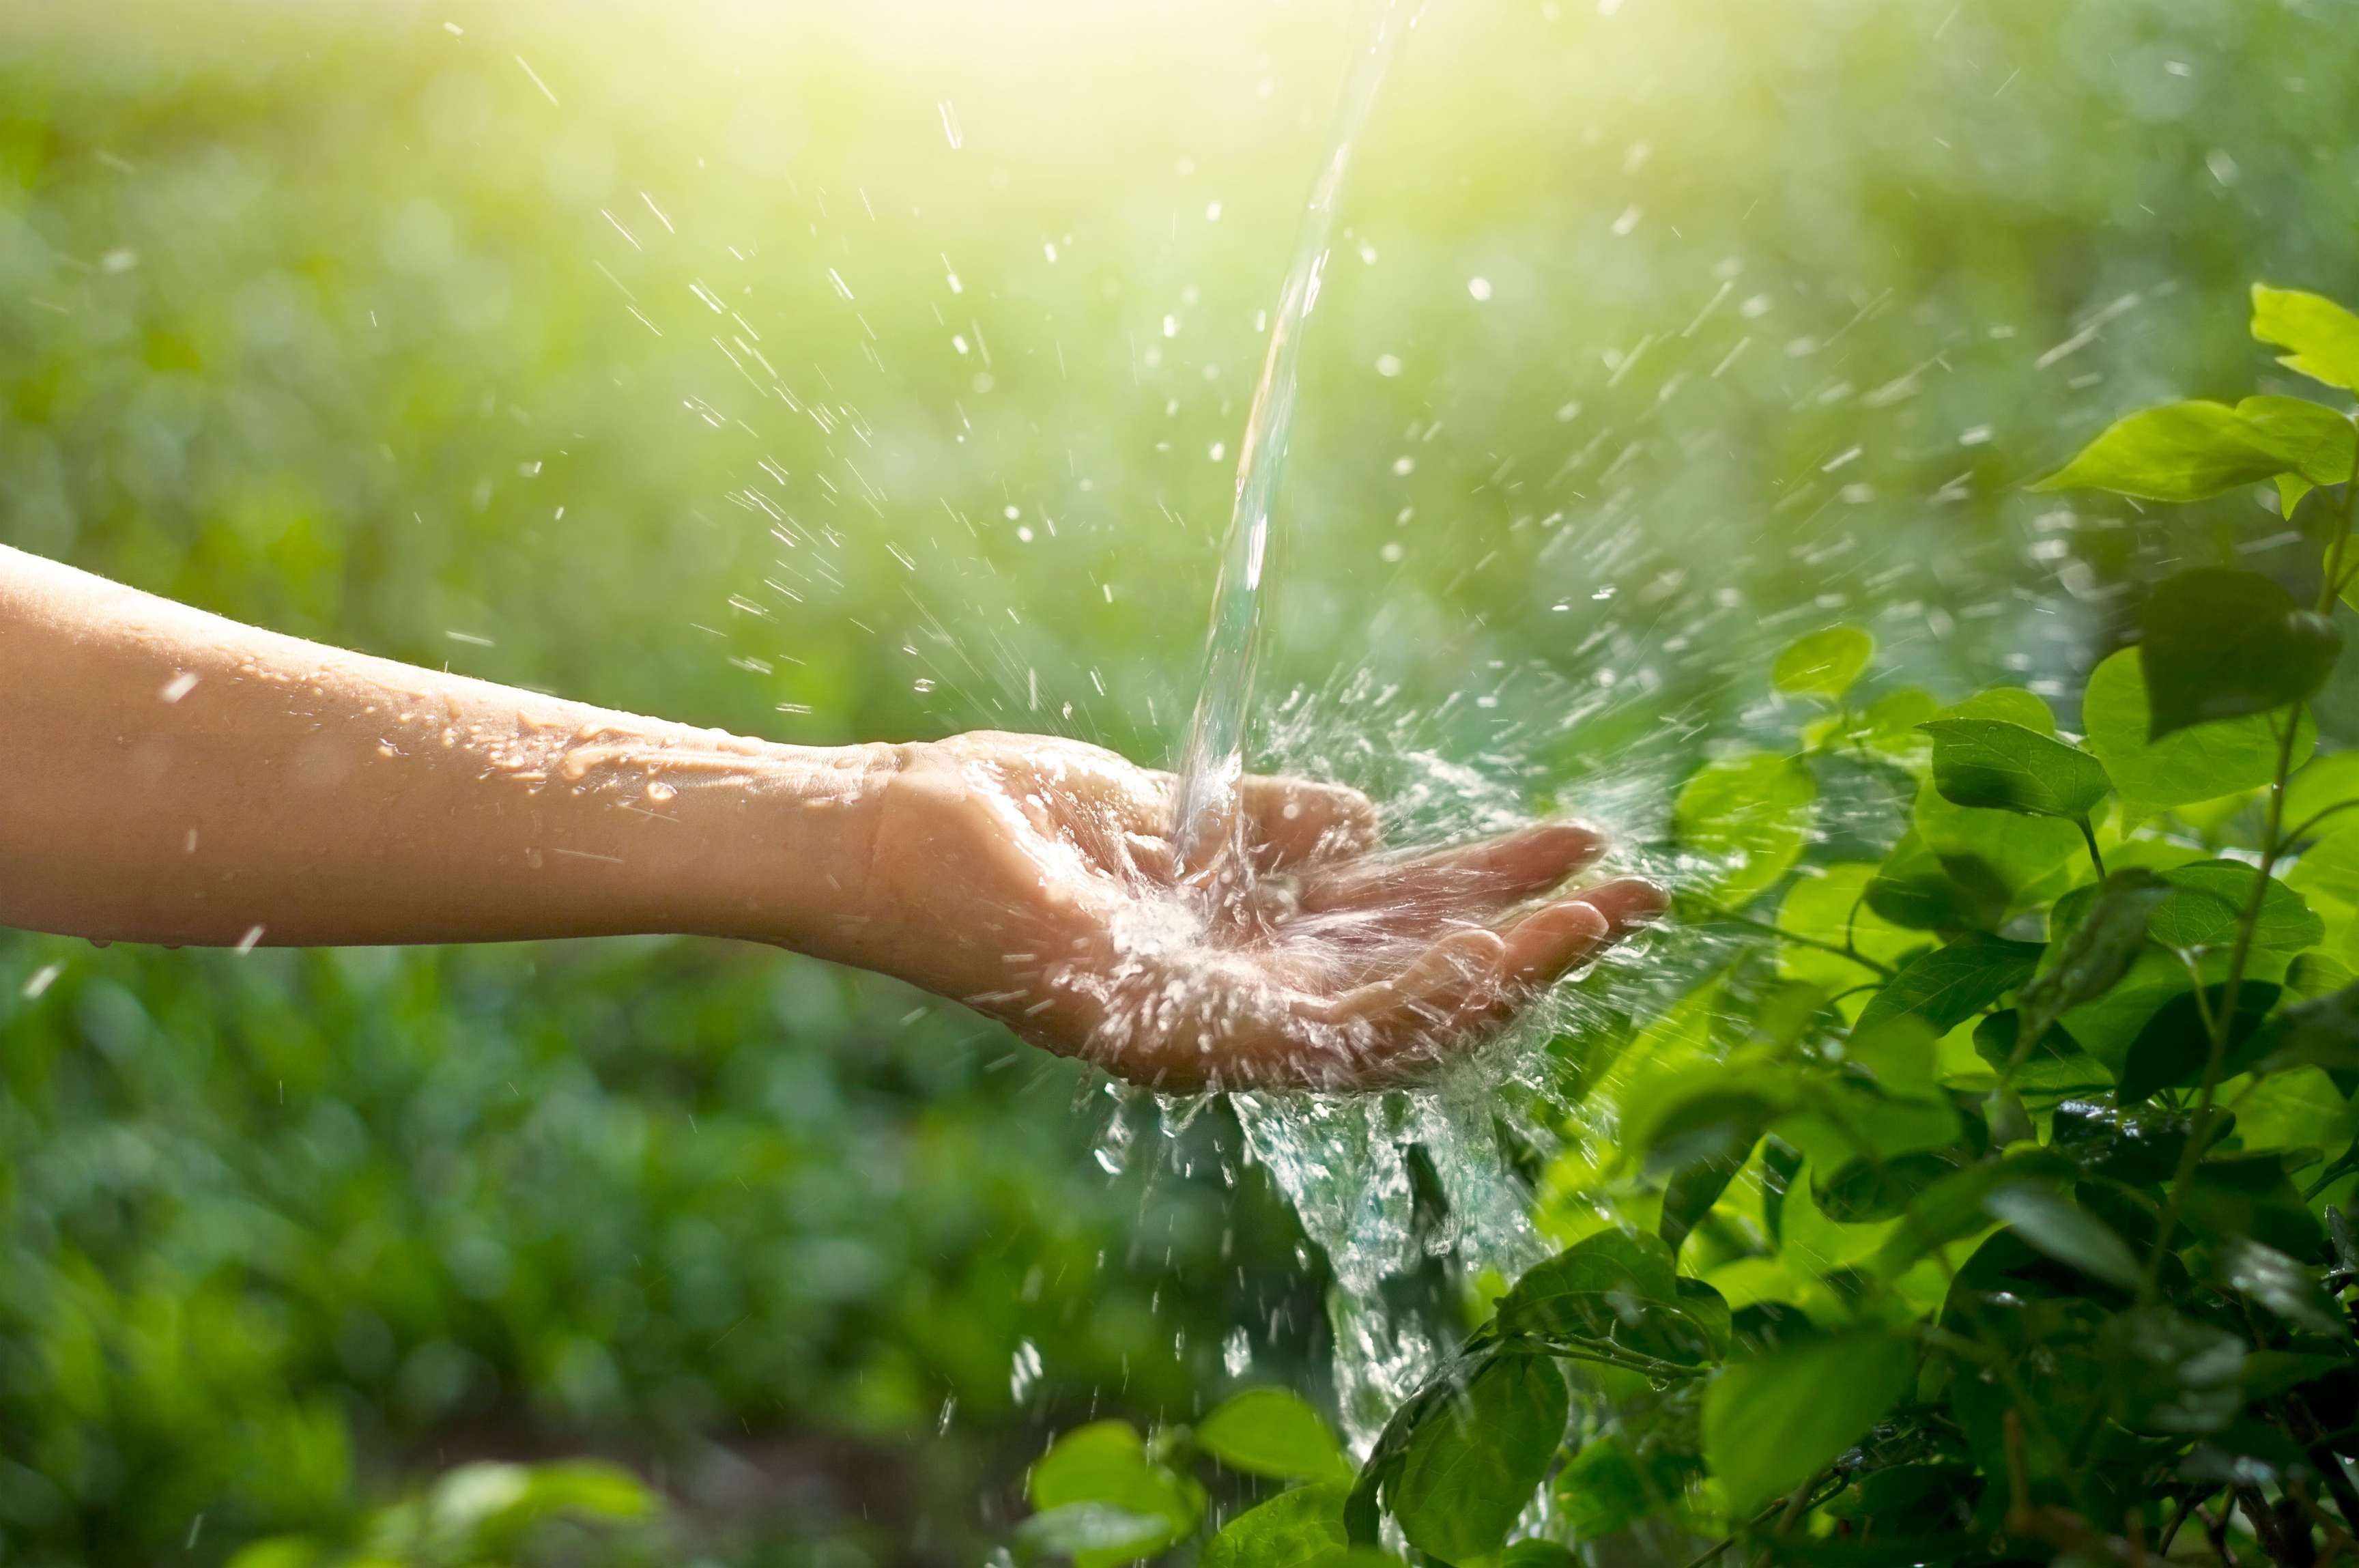 Water pouring in hand on nature background.